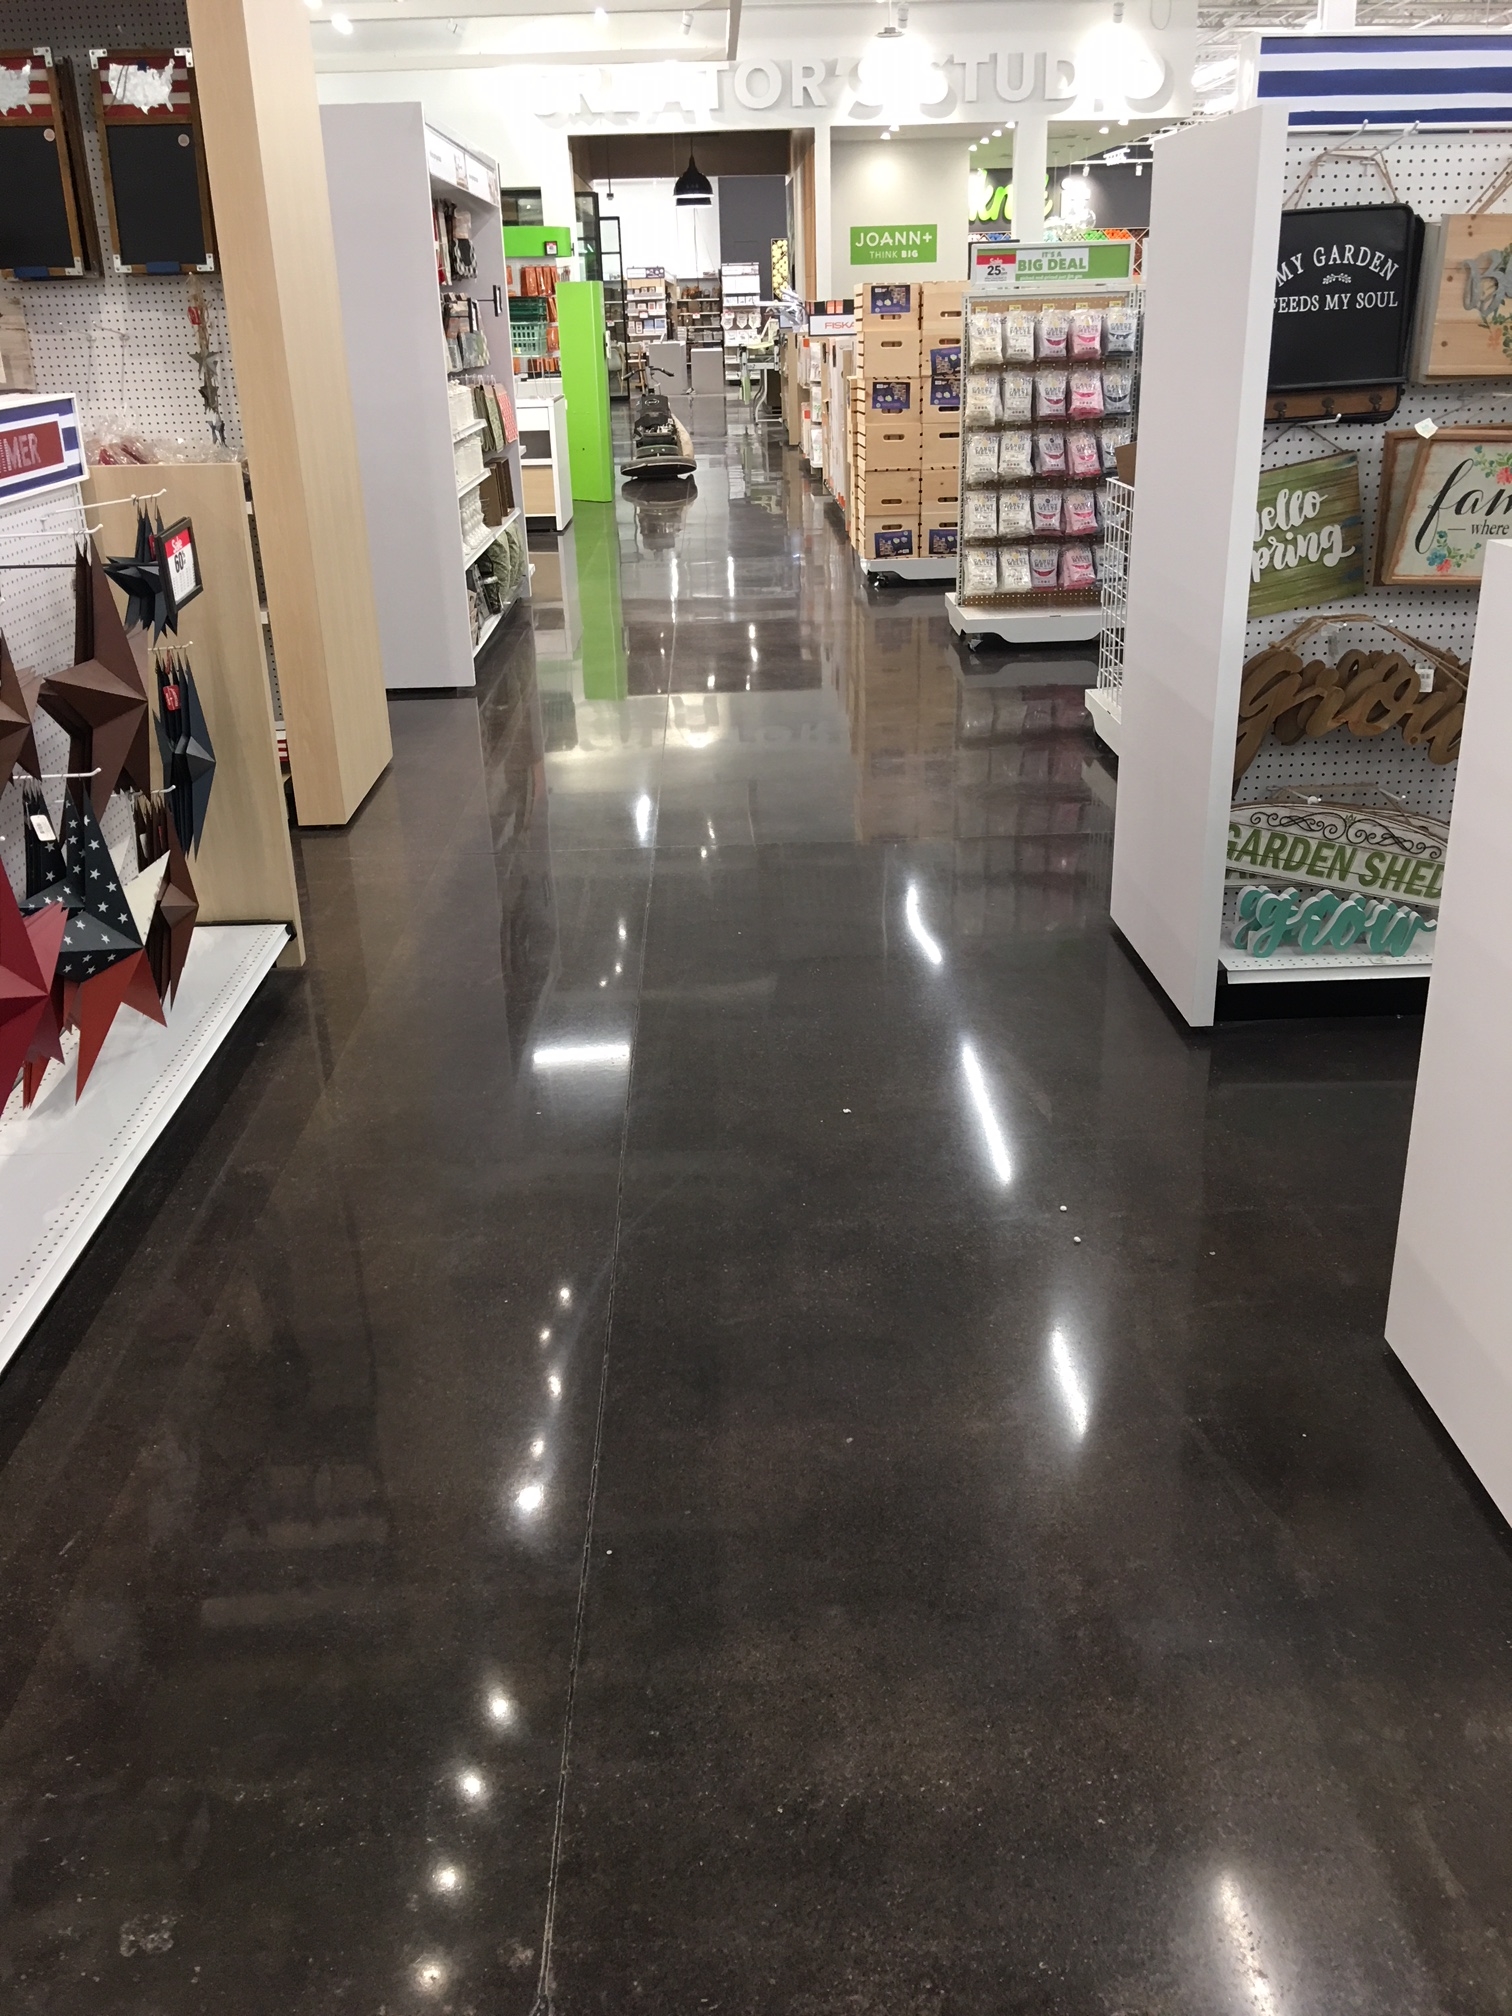 A polished concrete aisle in a store.